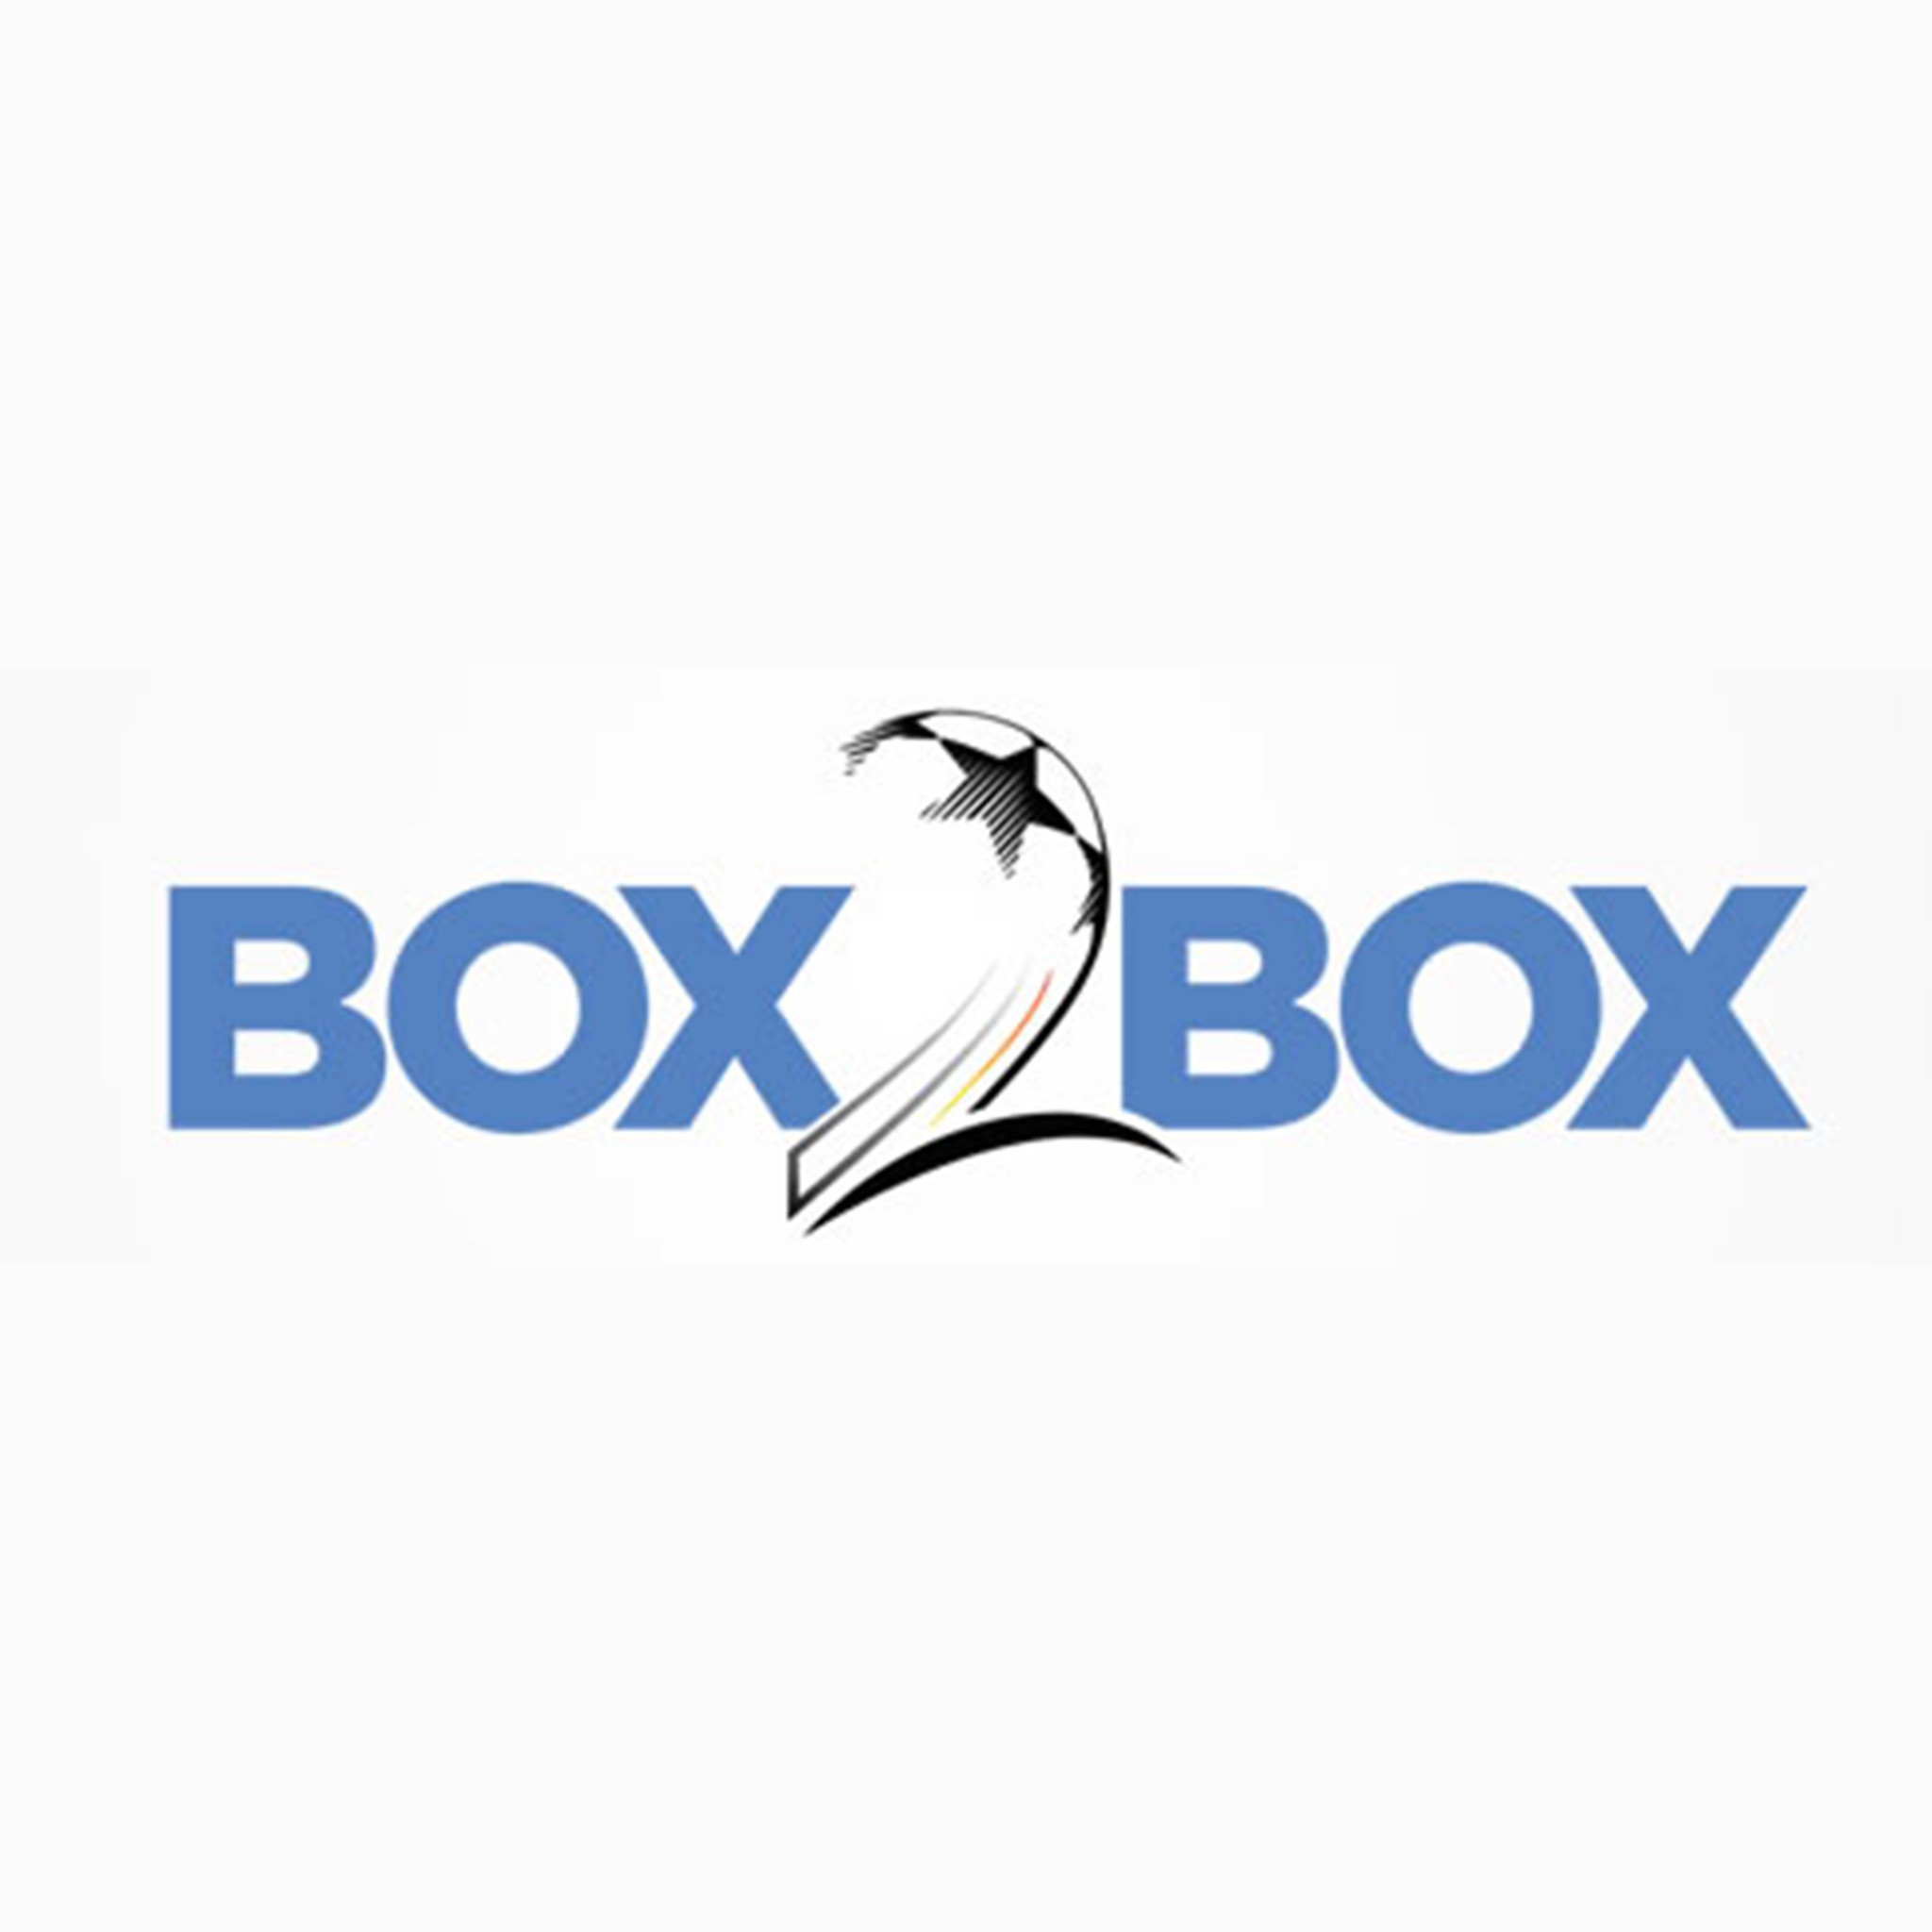 Box2Box - Robbie Thomson reviews Olyroos Olympics exit, Nancy Frostick as Ipswich Town near promotion